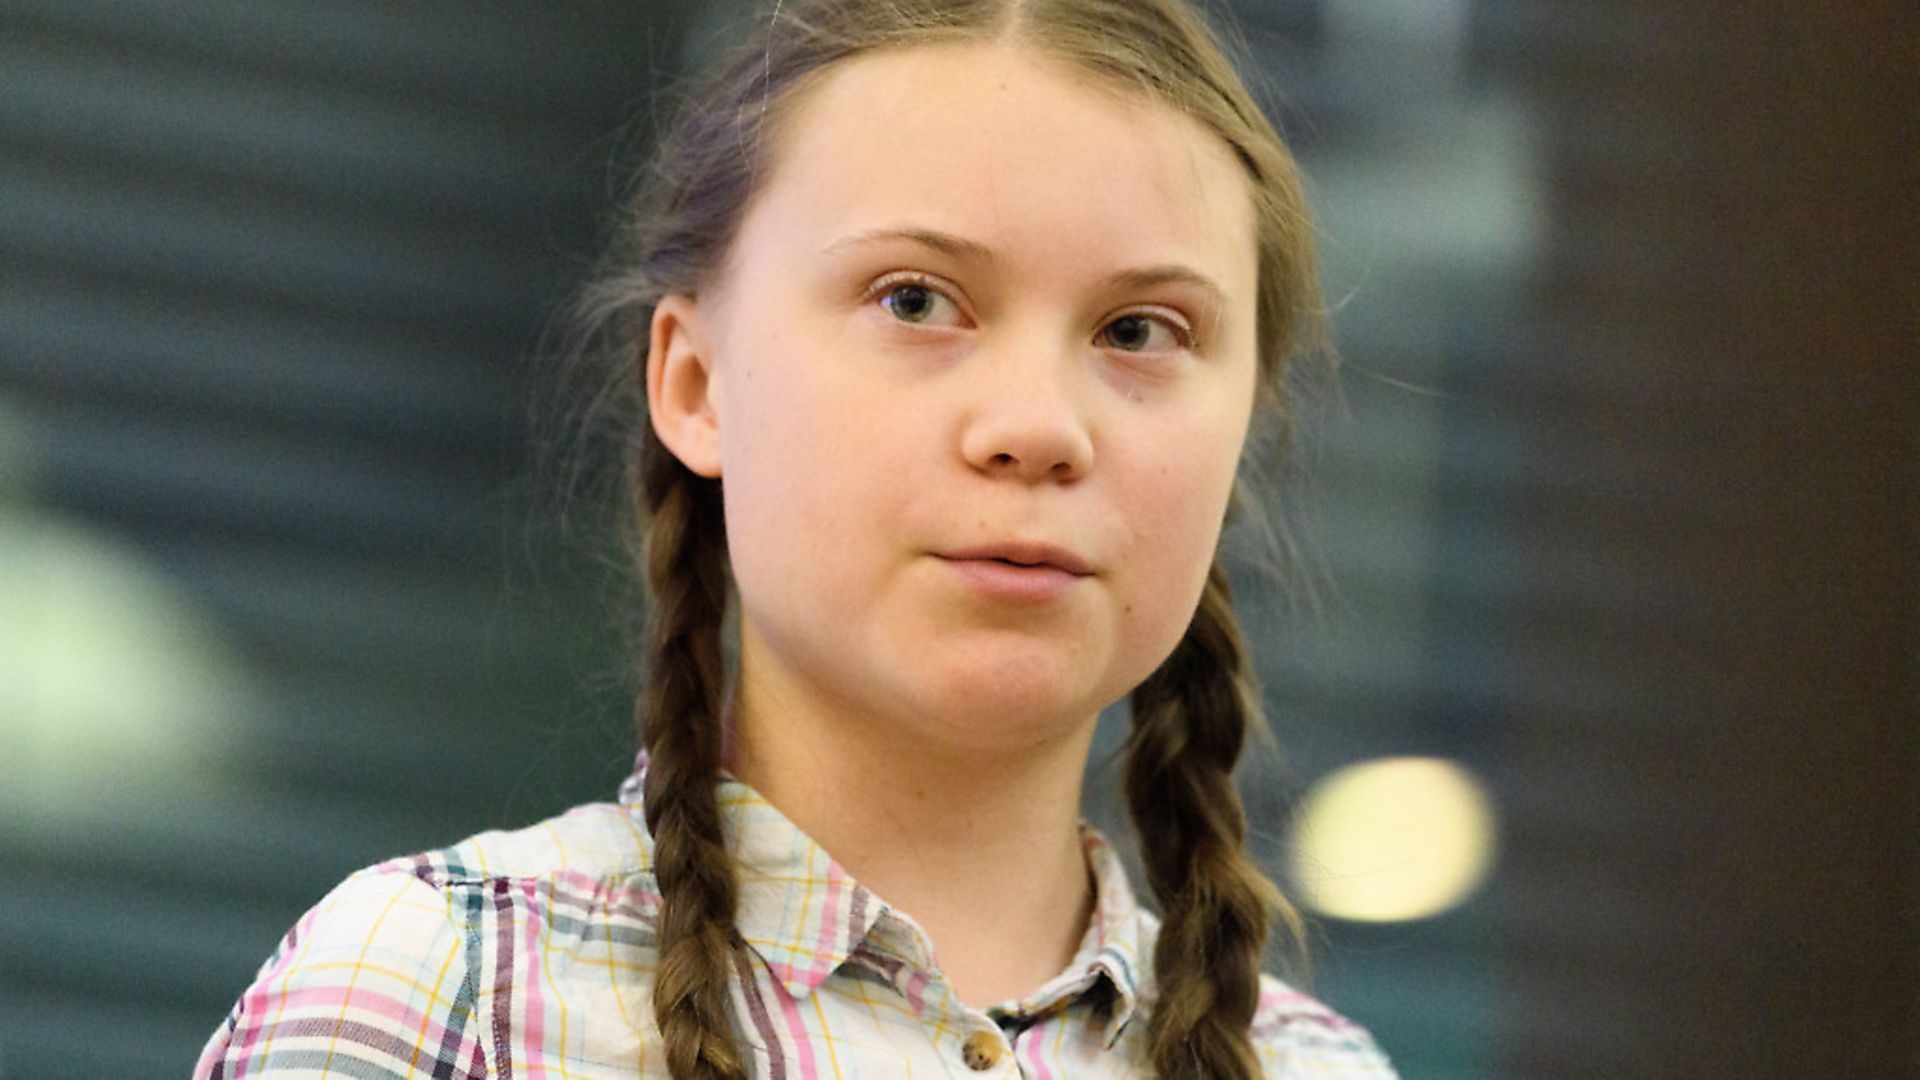 Greta Thunberg (question eight) (Photo by Leon Neal/Getty Images) - Credit: Getty Images